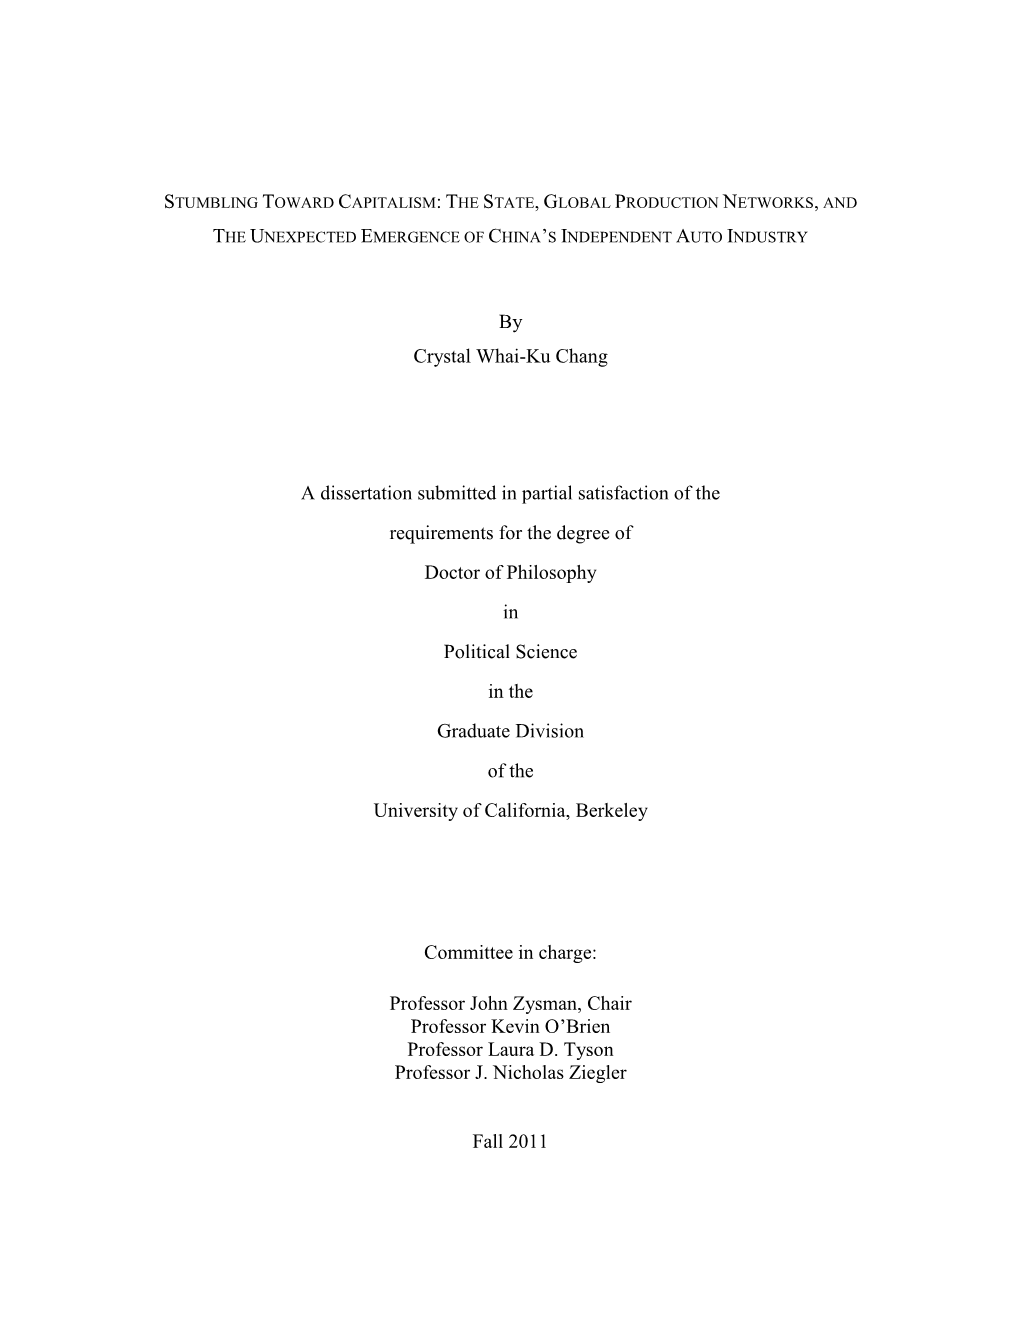 By Crystal Whai-Ku Chang a Dissertation Submitted in Partial